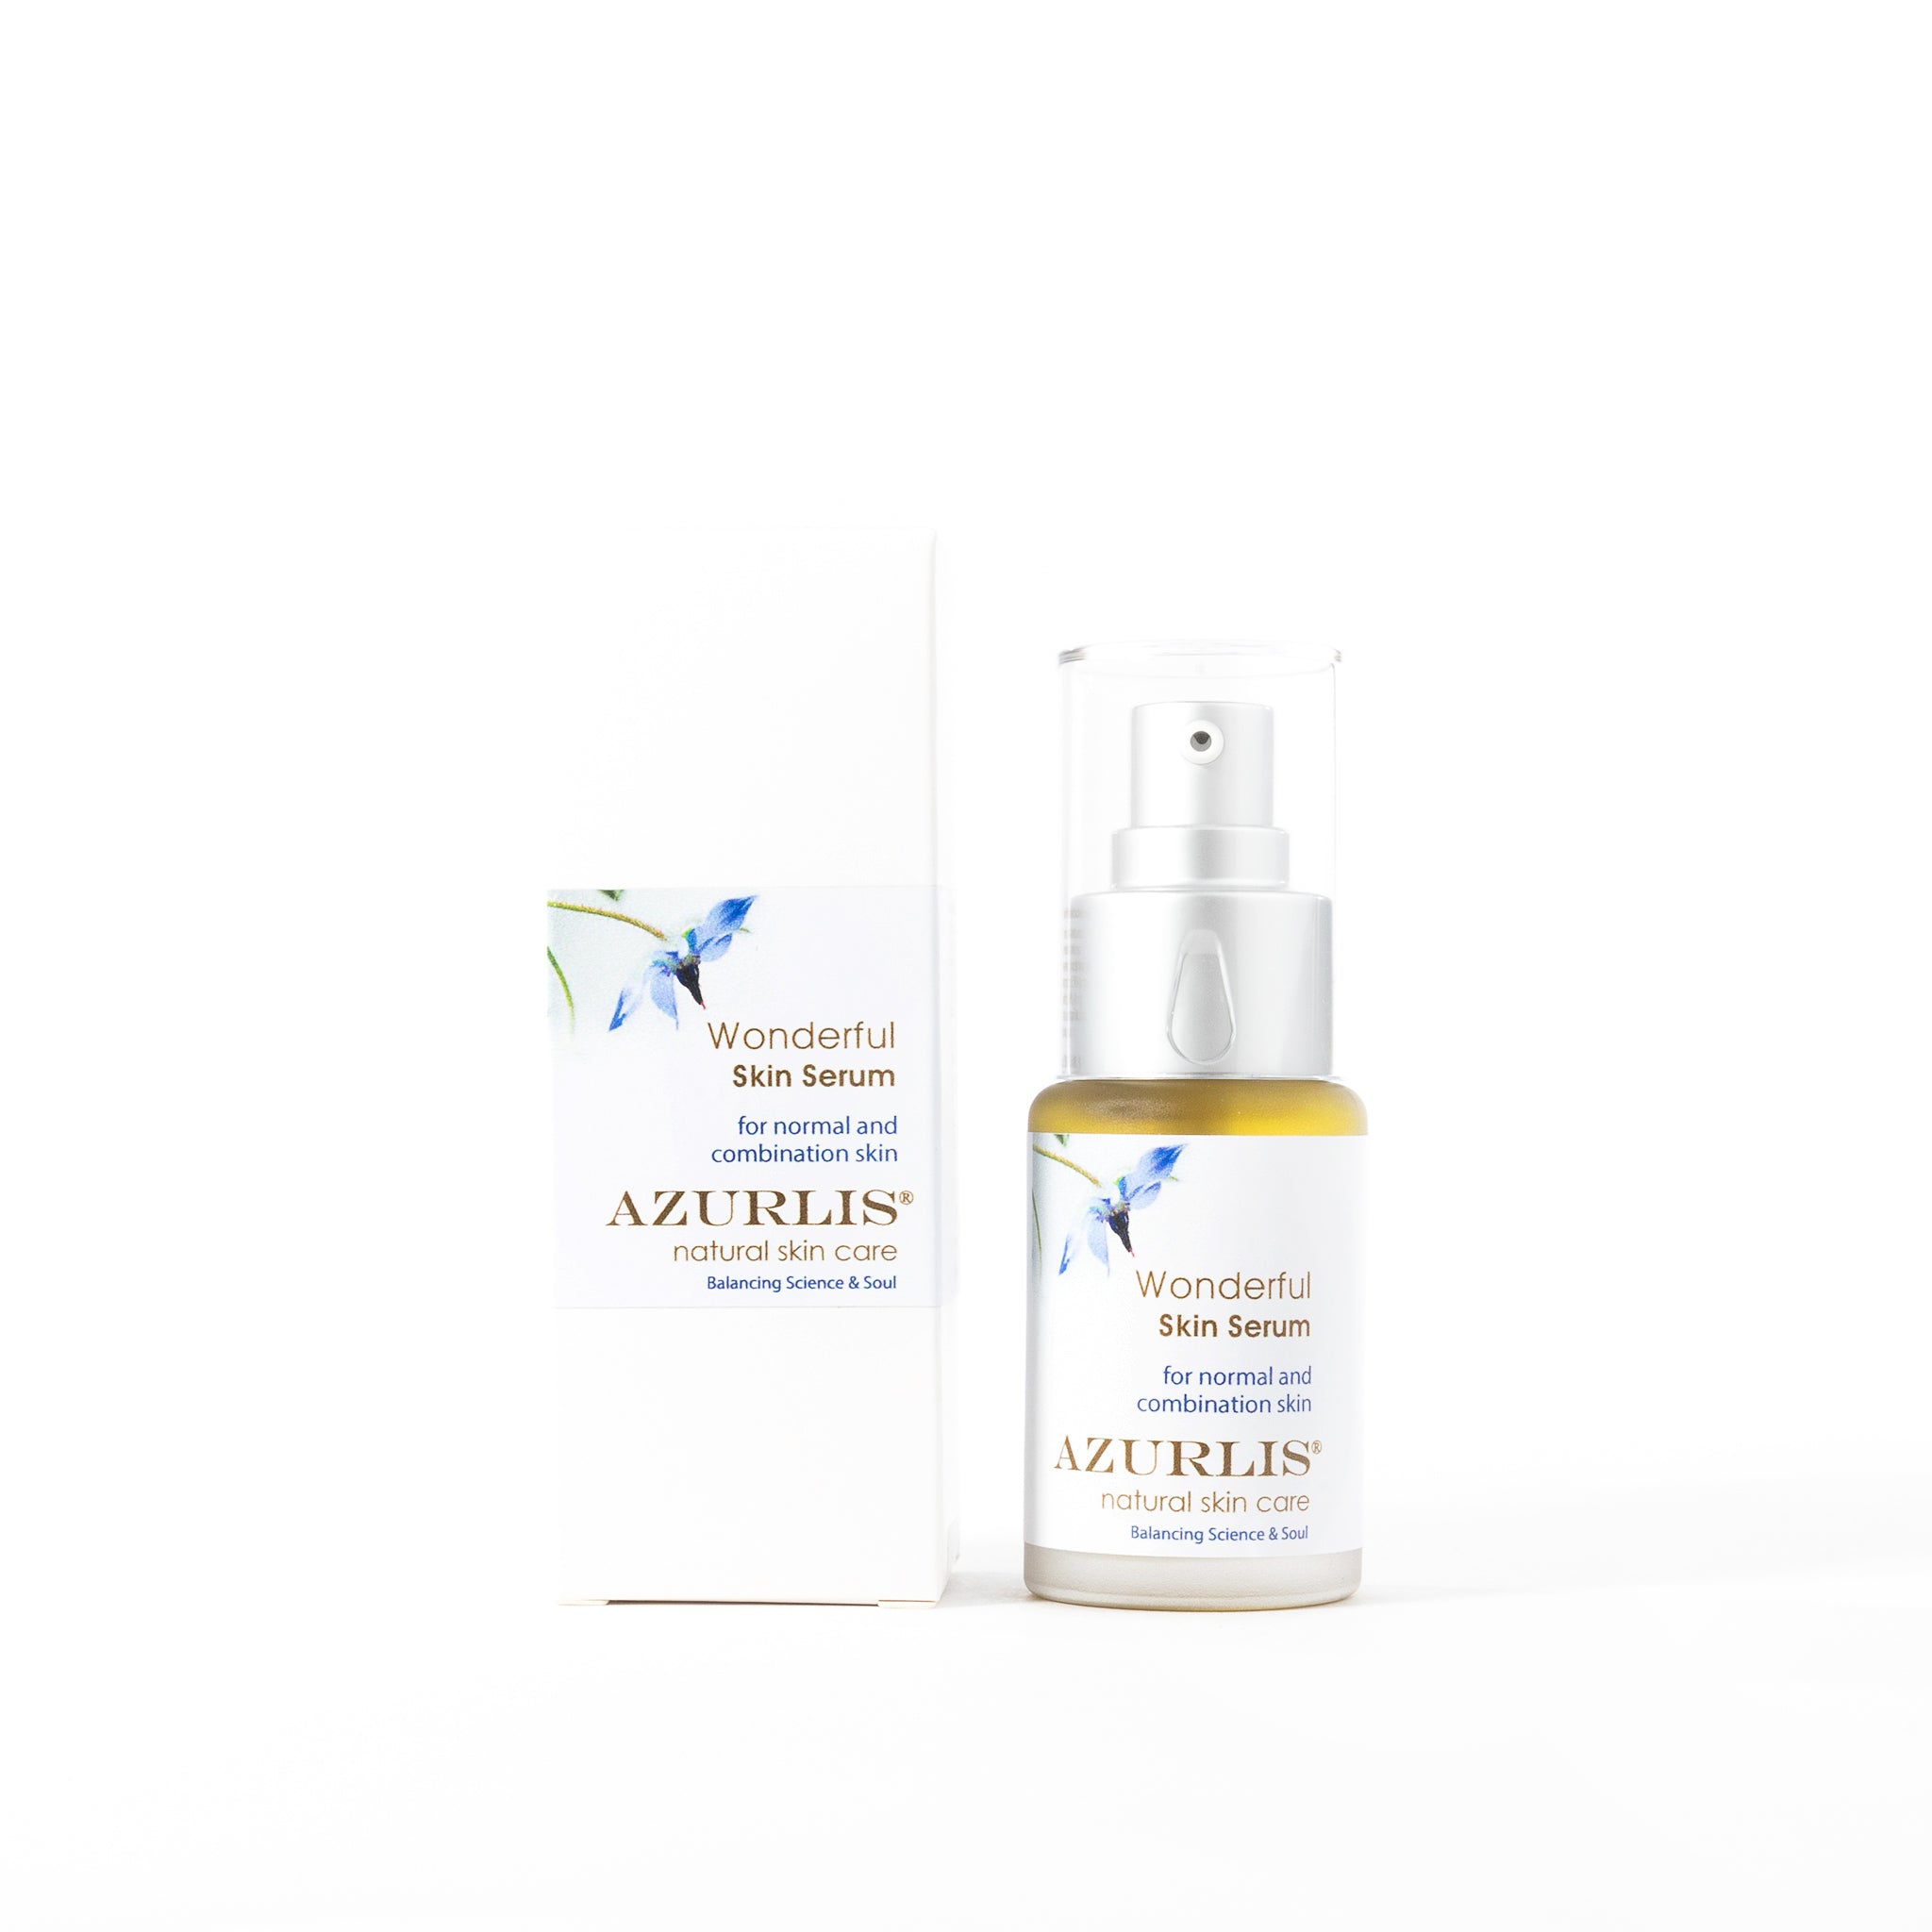 Azurlis™ Wonderful Skin Serum 30ml For normal &amp; combination skin.  A wonderful serum that can be used daily instead of your moisturiser. Feeds and protects the skin, while nurturing the germinal cellular layer.